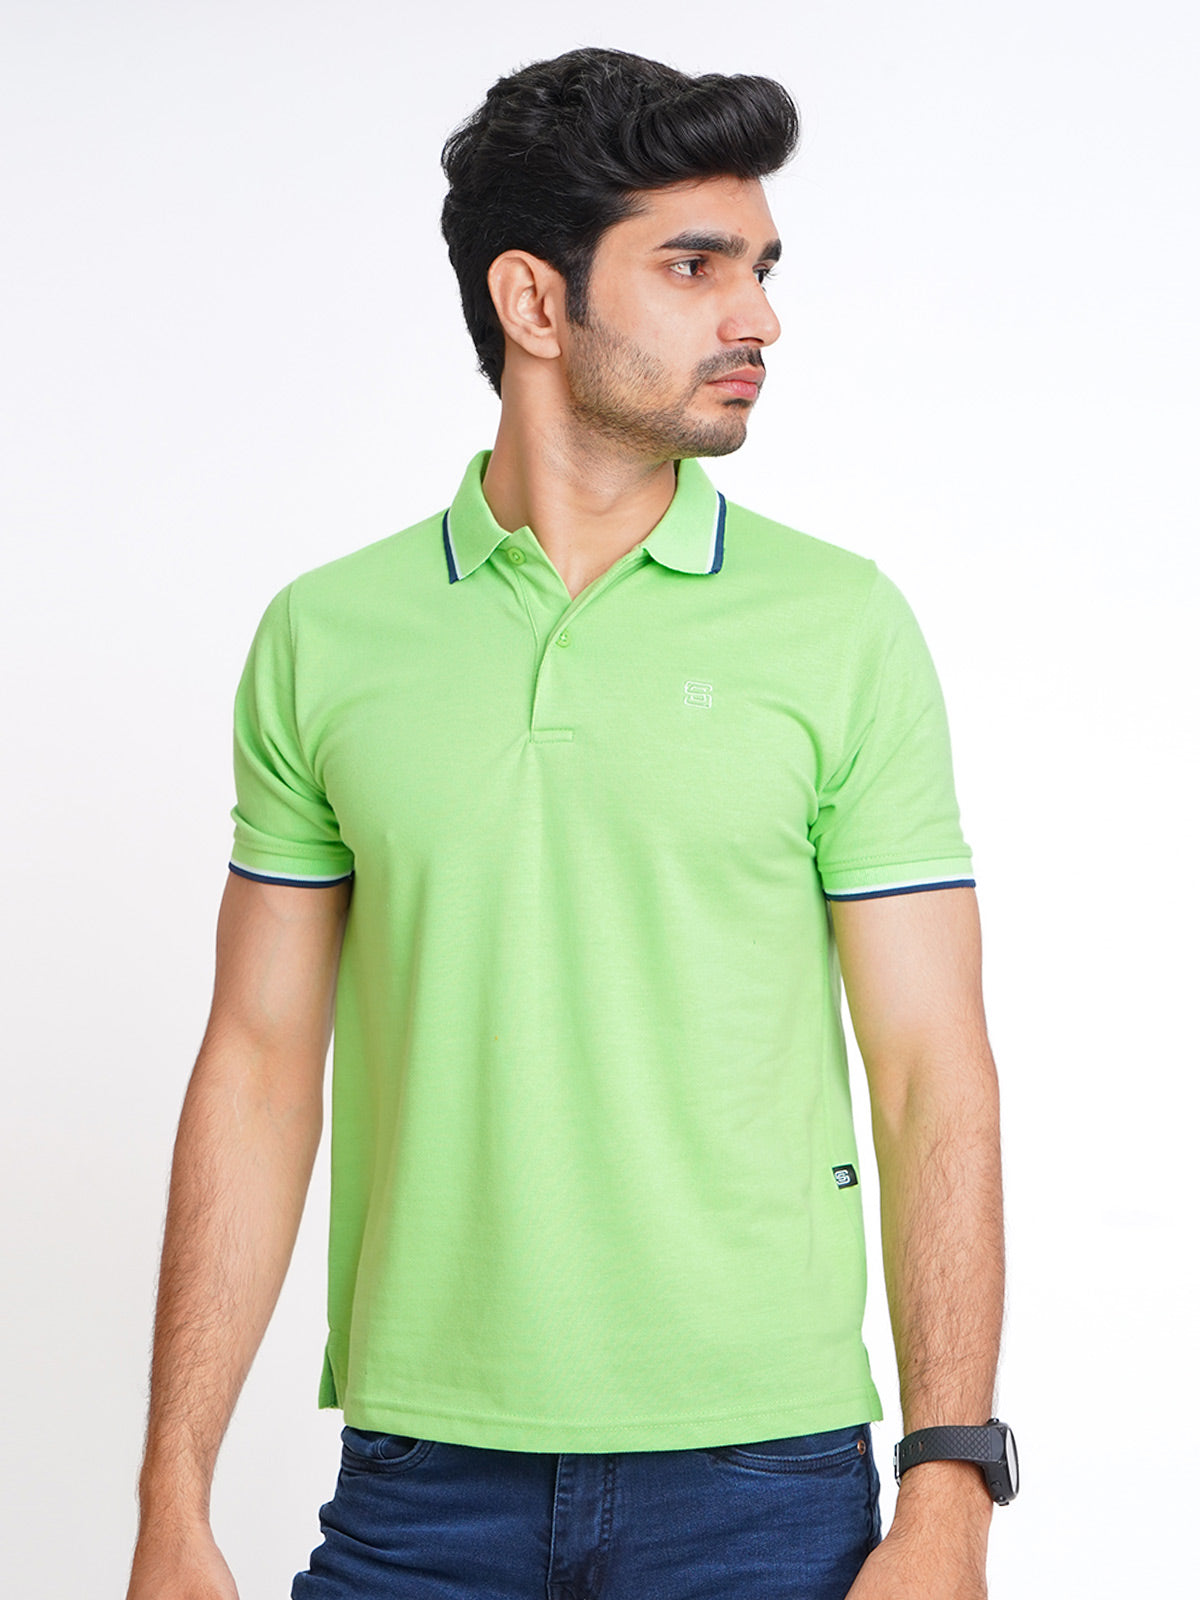 Light Green Plain Contrast Tipping Half Sleeves Polo T-Shirt (POLO-584)